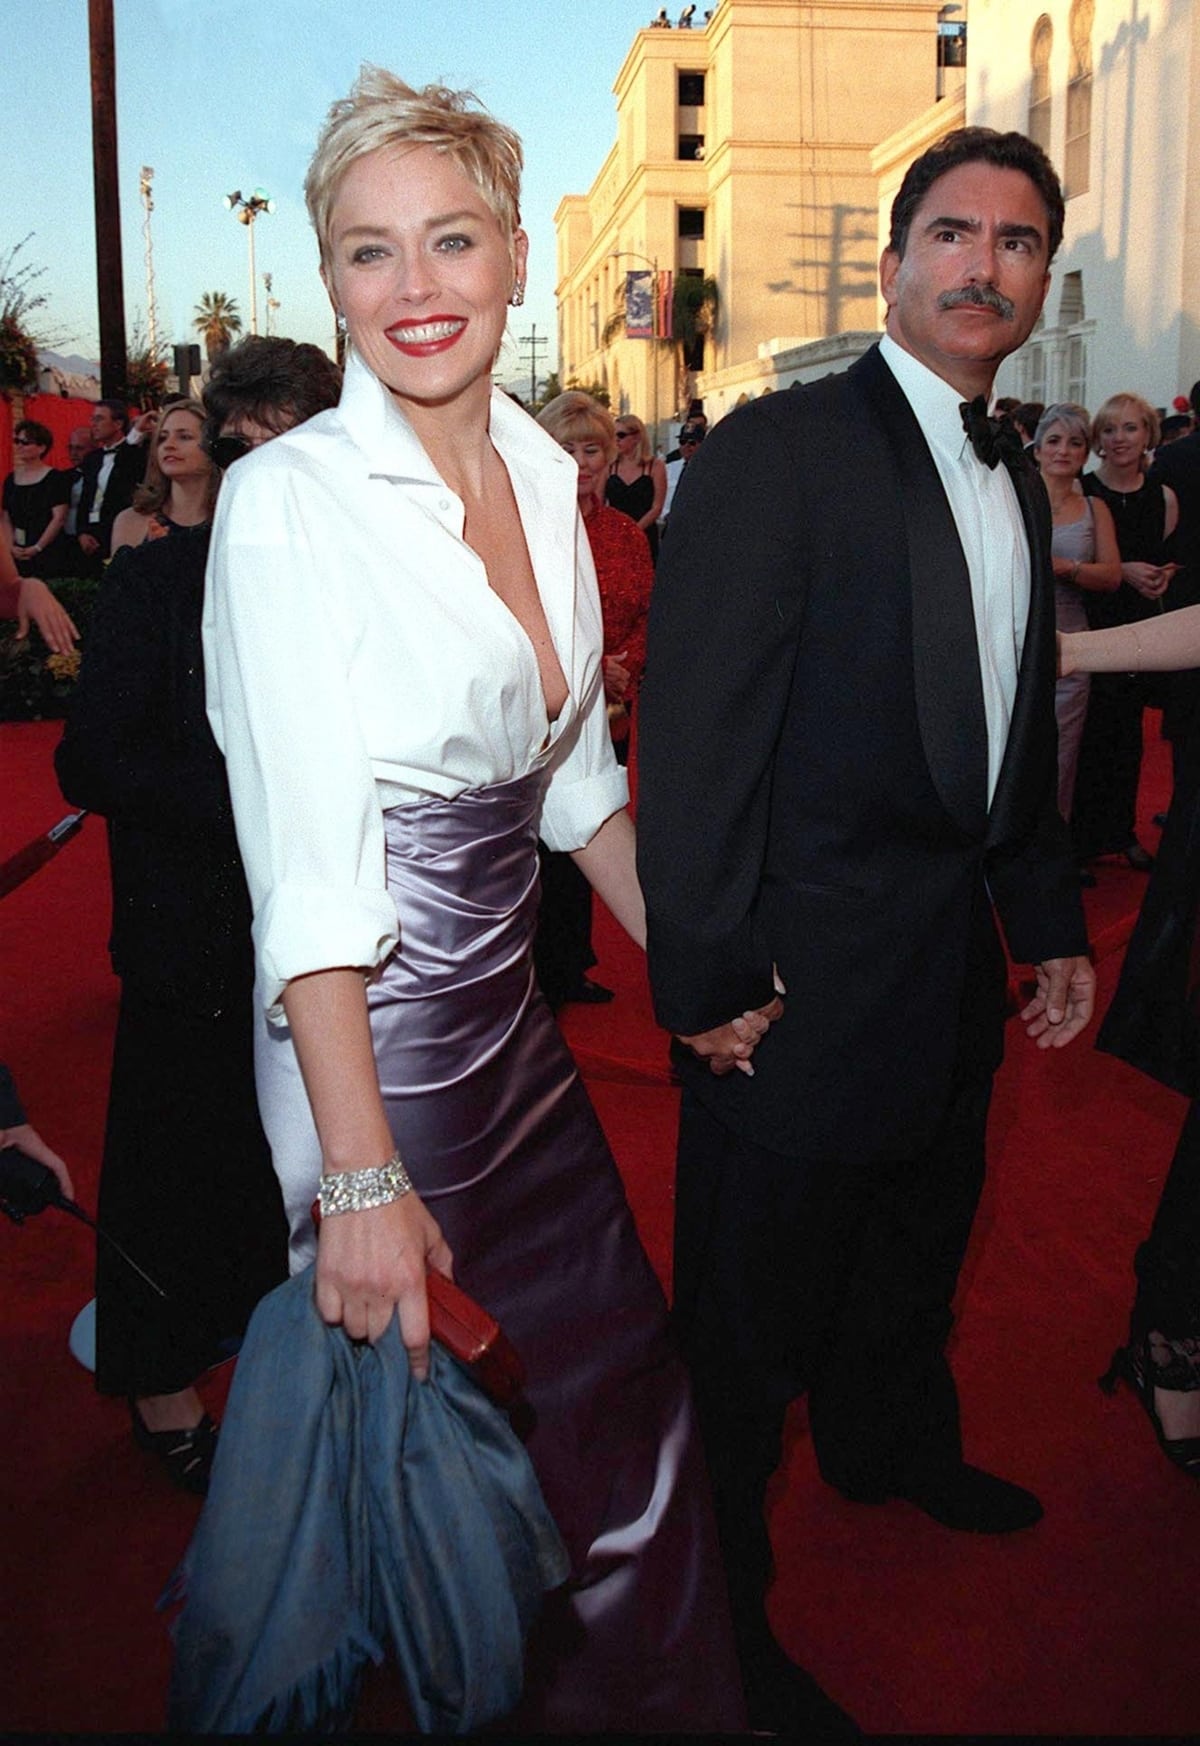 Sharon Stone in a Gap shirt and a Vera Wang skirt with her then-husband Phil Bronstein during the 70th Academy Awards ceremony